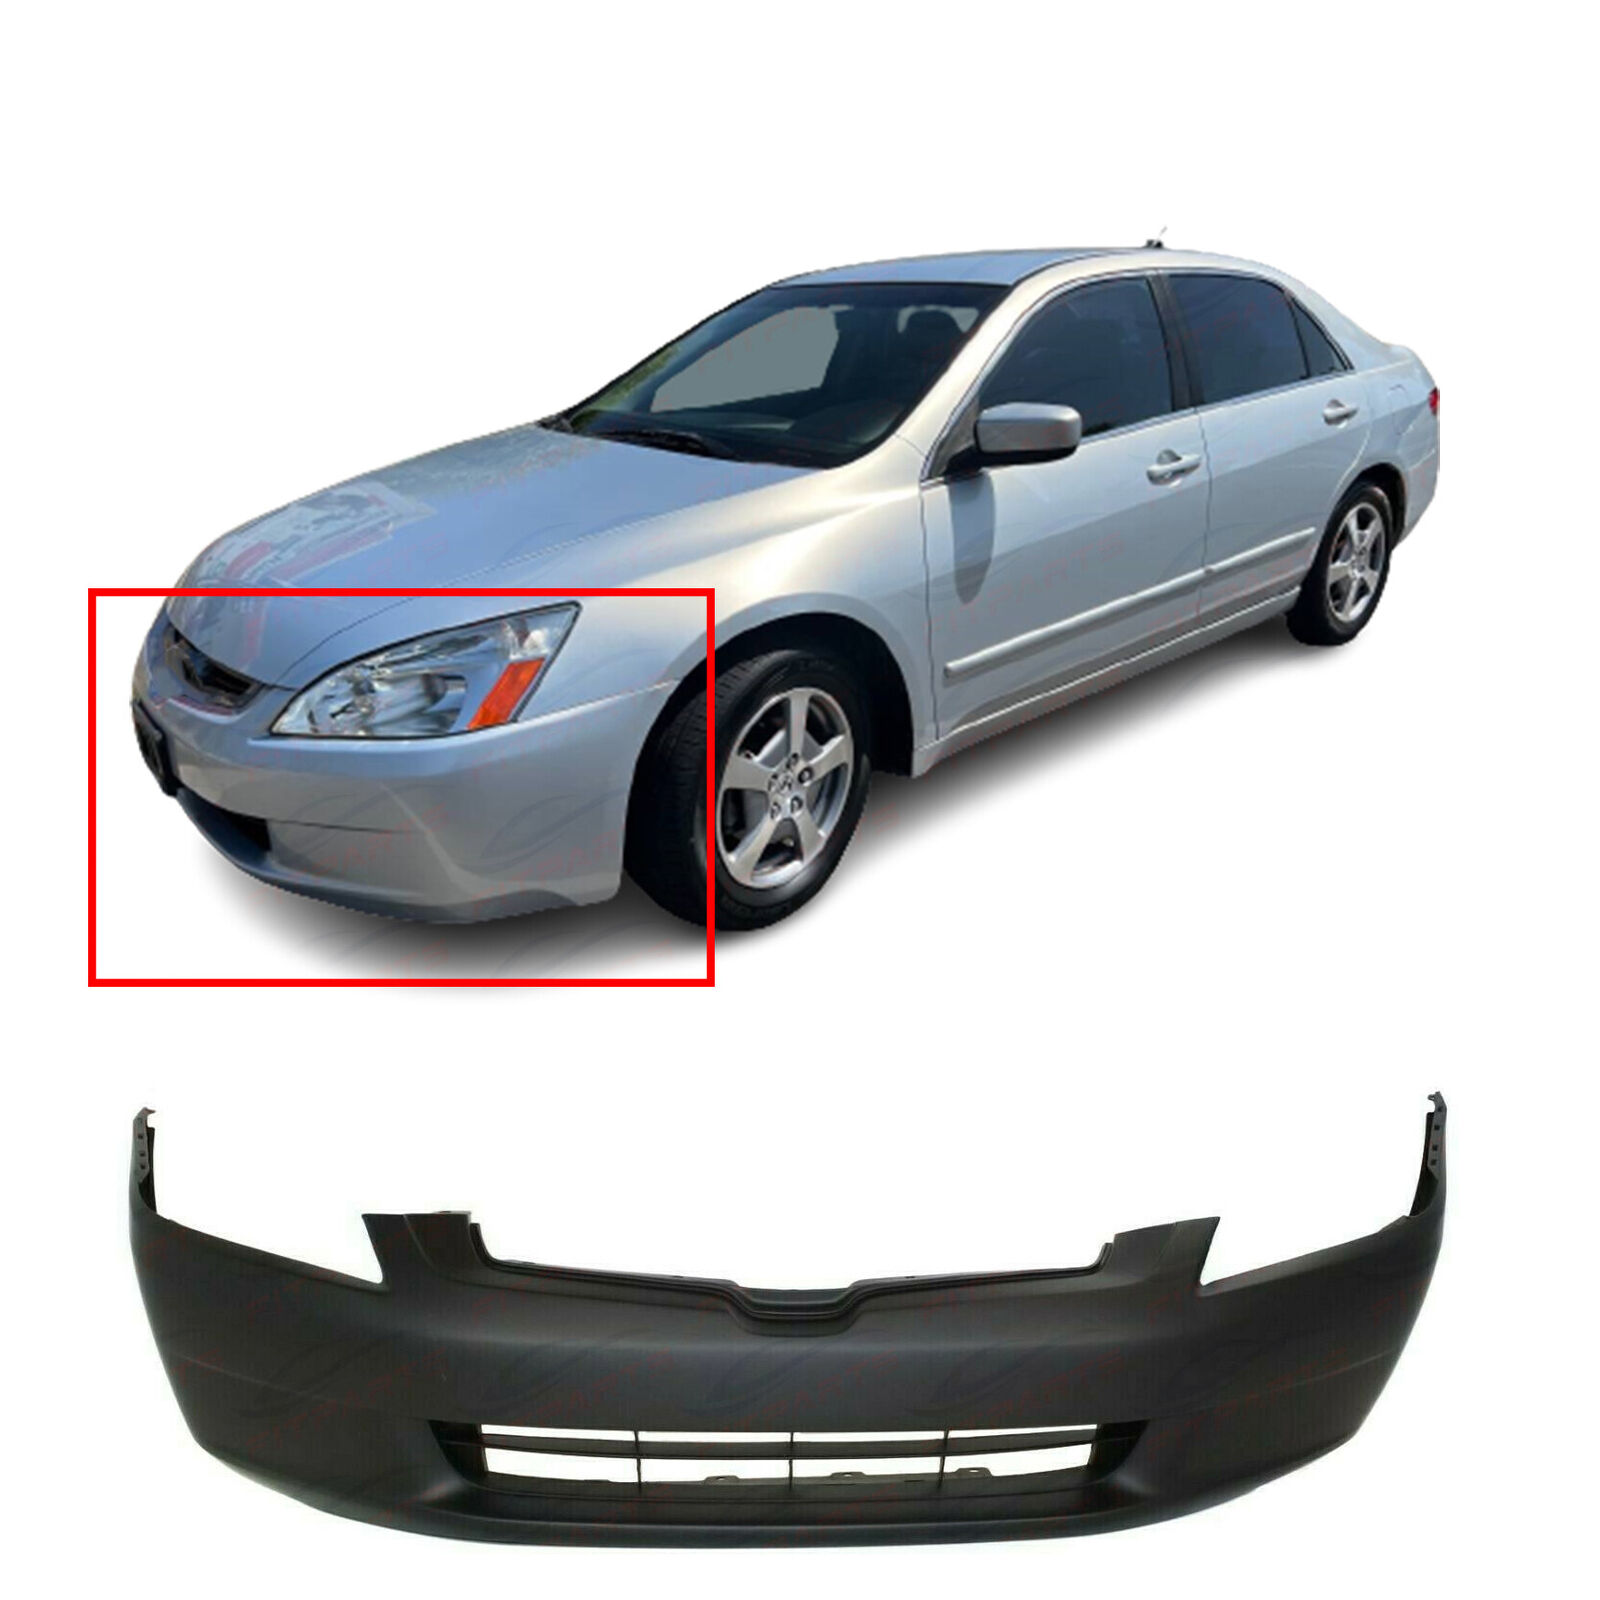 Primed Front Bumper Cover for 2003-2005 Honda Accord DX EX LX Hybrid